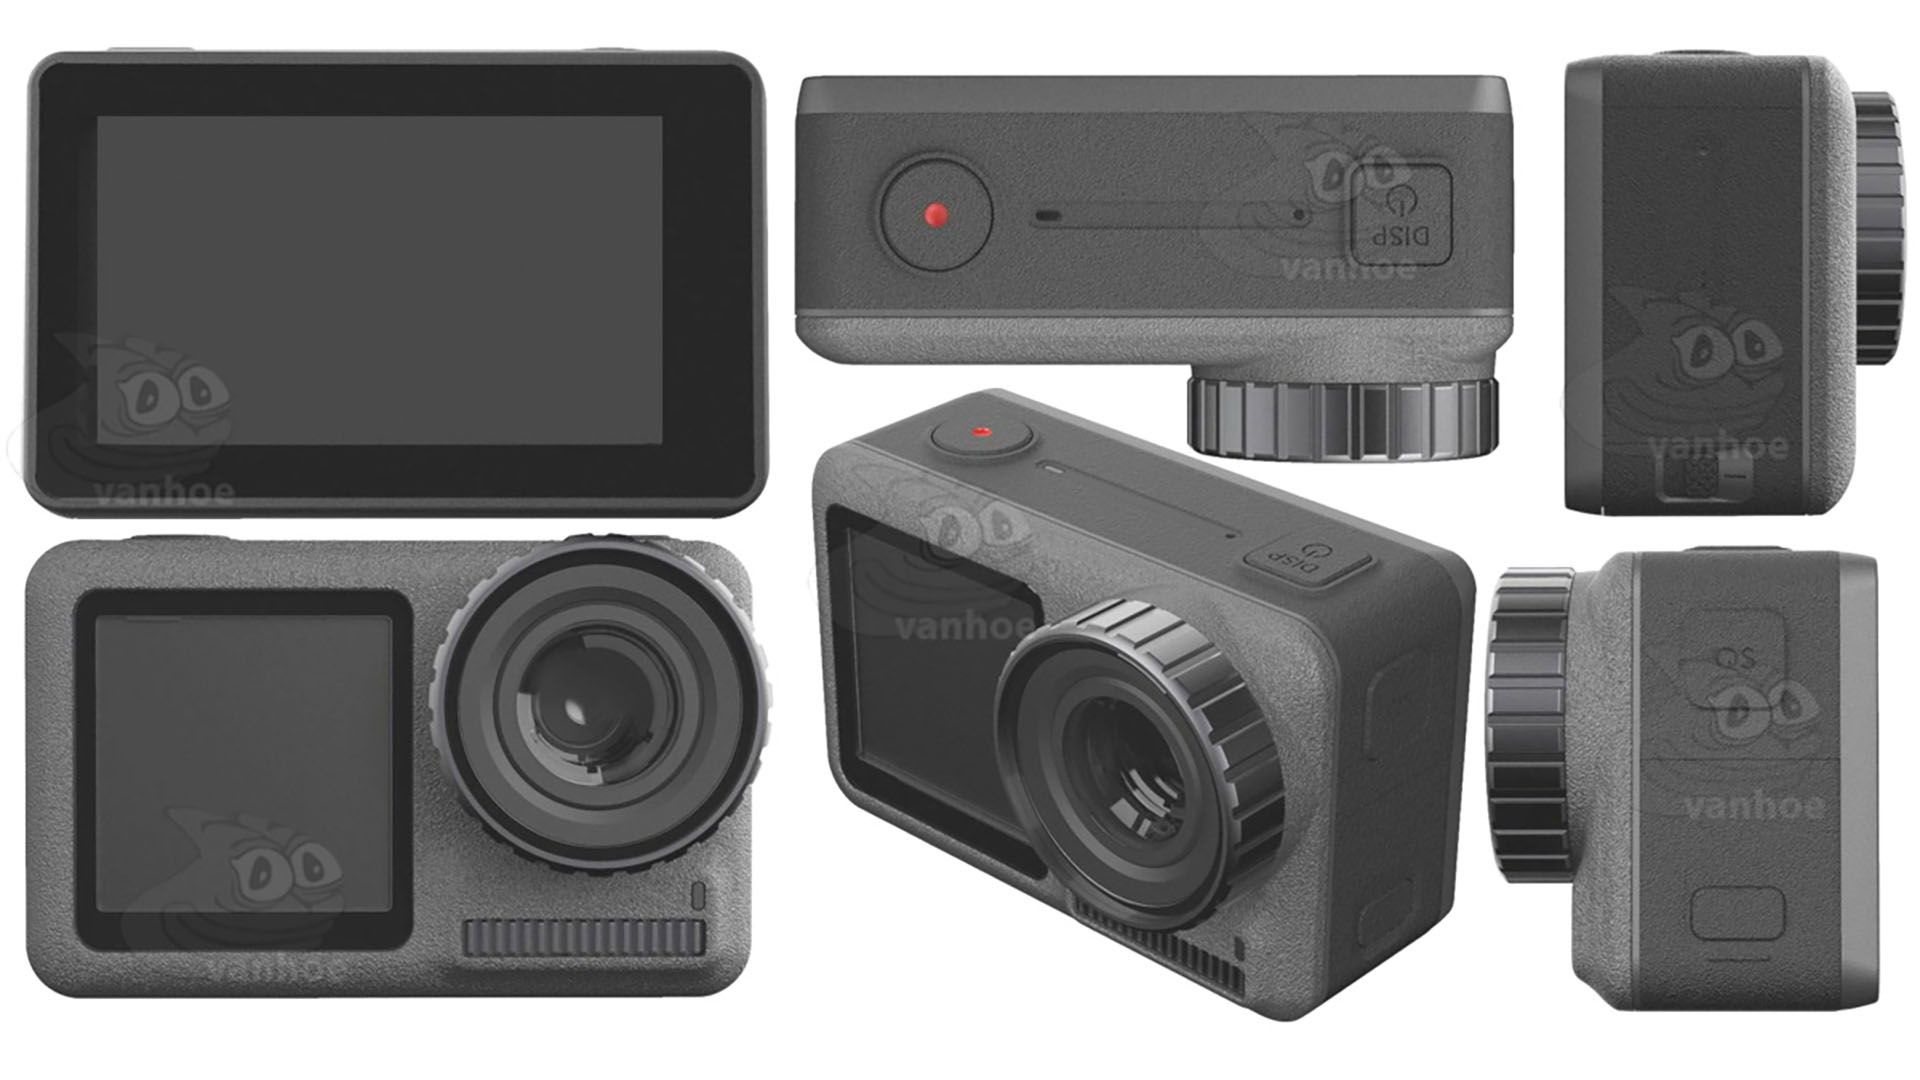 DJI Osmo Action camera specs and details leak image 1